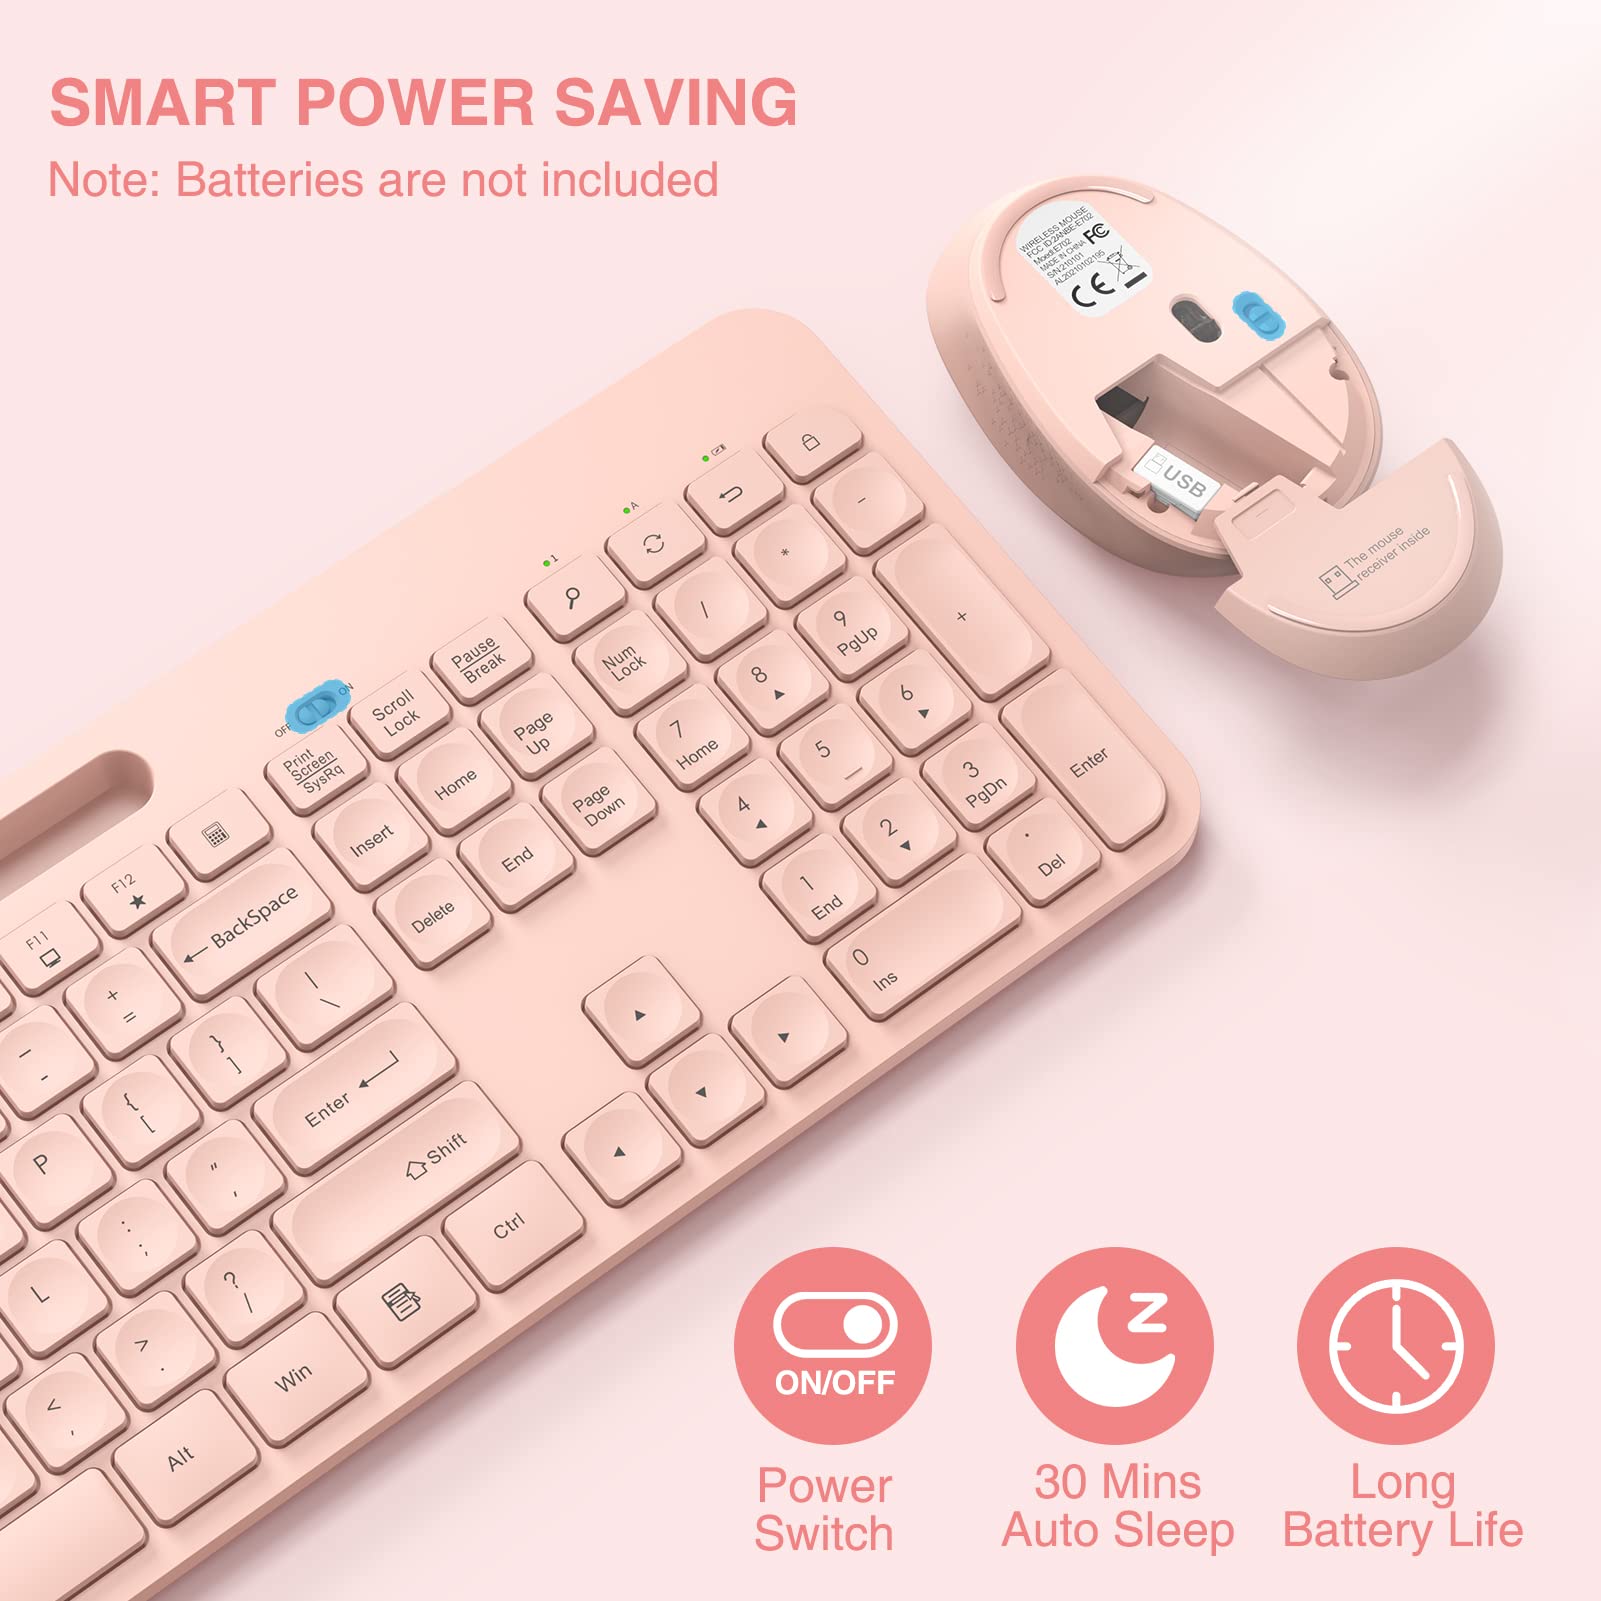 Wireless Keyboard and Mouse Combo, WisFox 2.4G USB Wireless Ergonomic with Phone Holder, Full-Size Keyboard and Mouse Set for Computer, Laptop and Desktop(Pink)